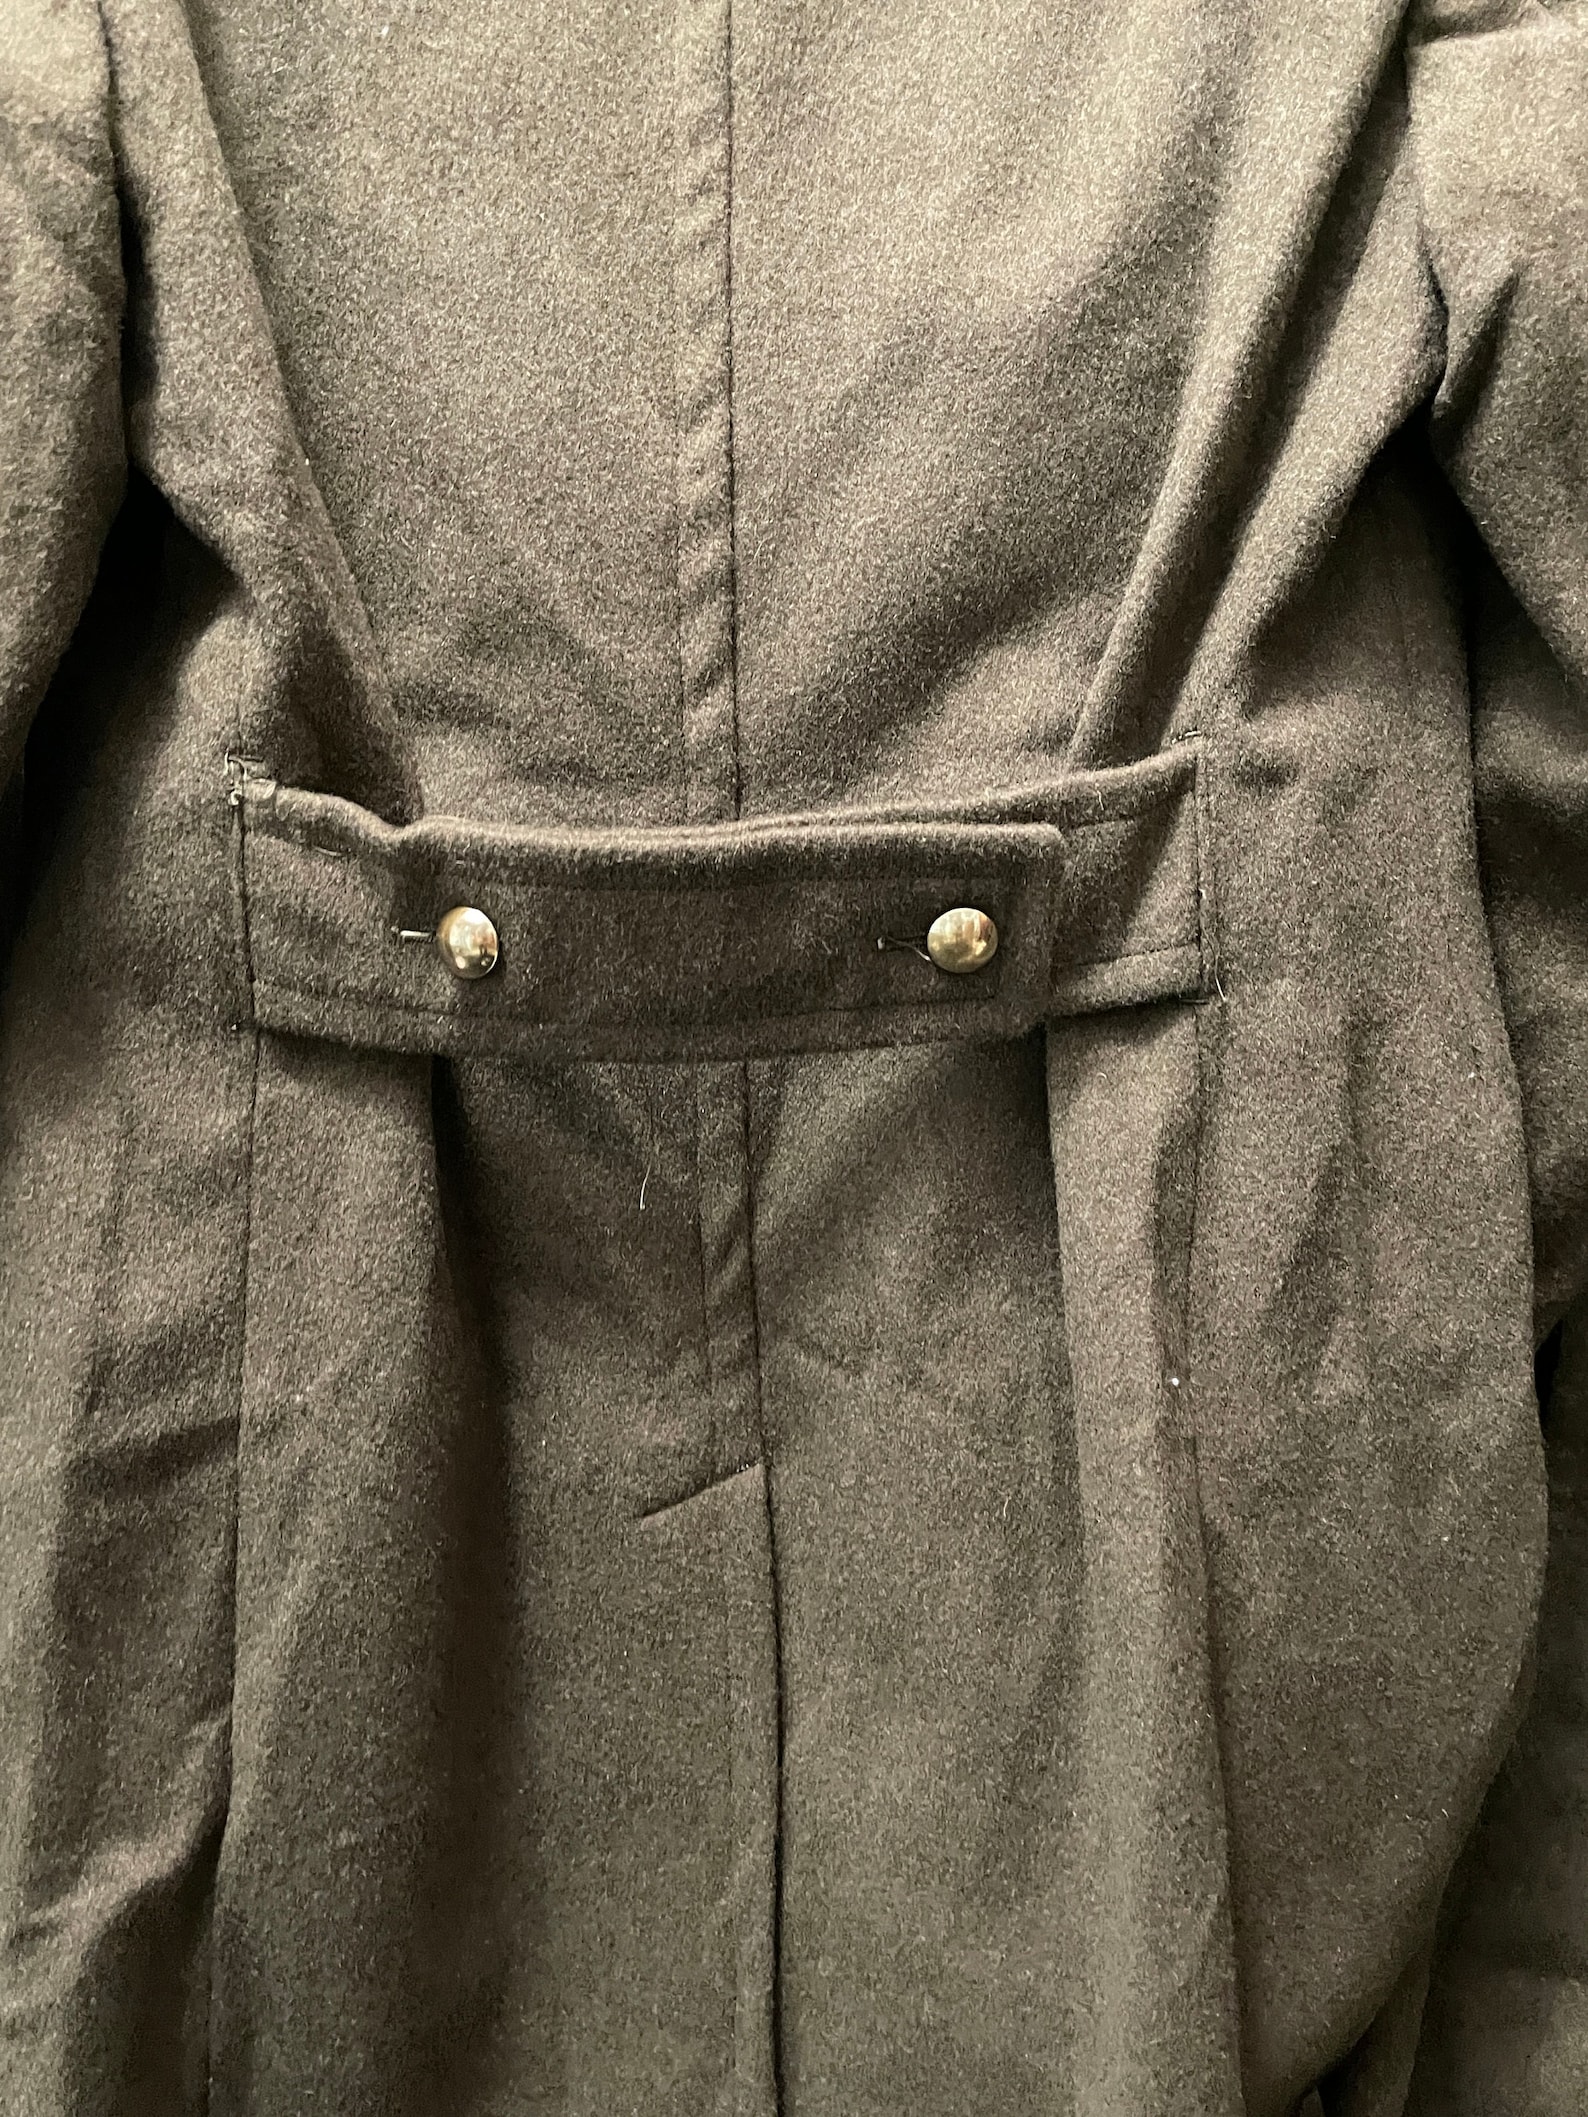 Vintage Military French Trench coat | Etsy